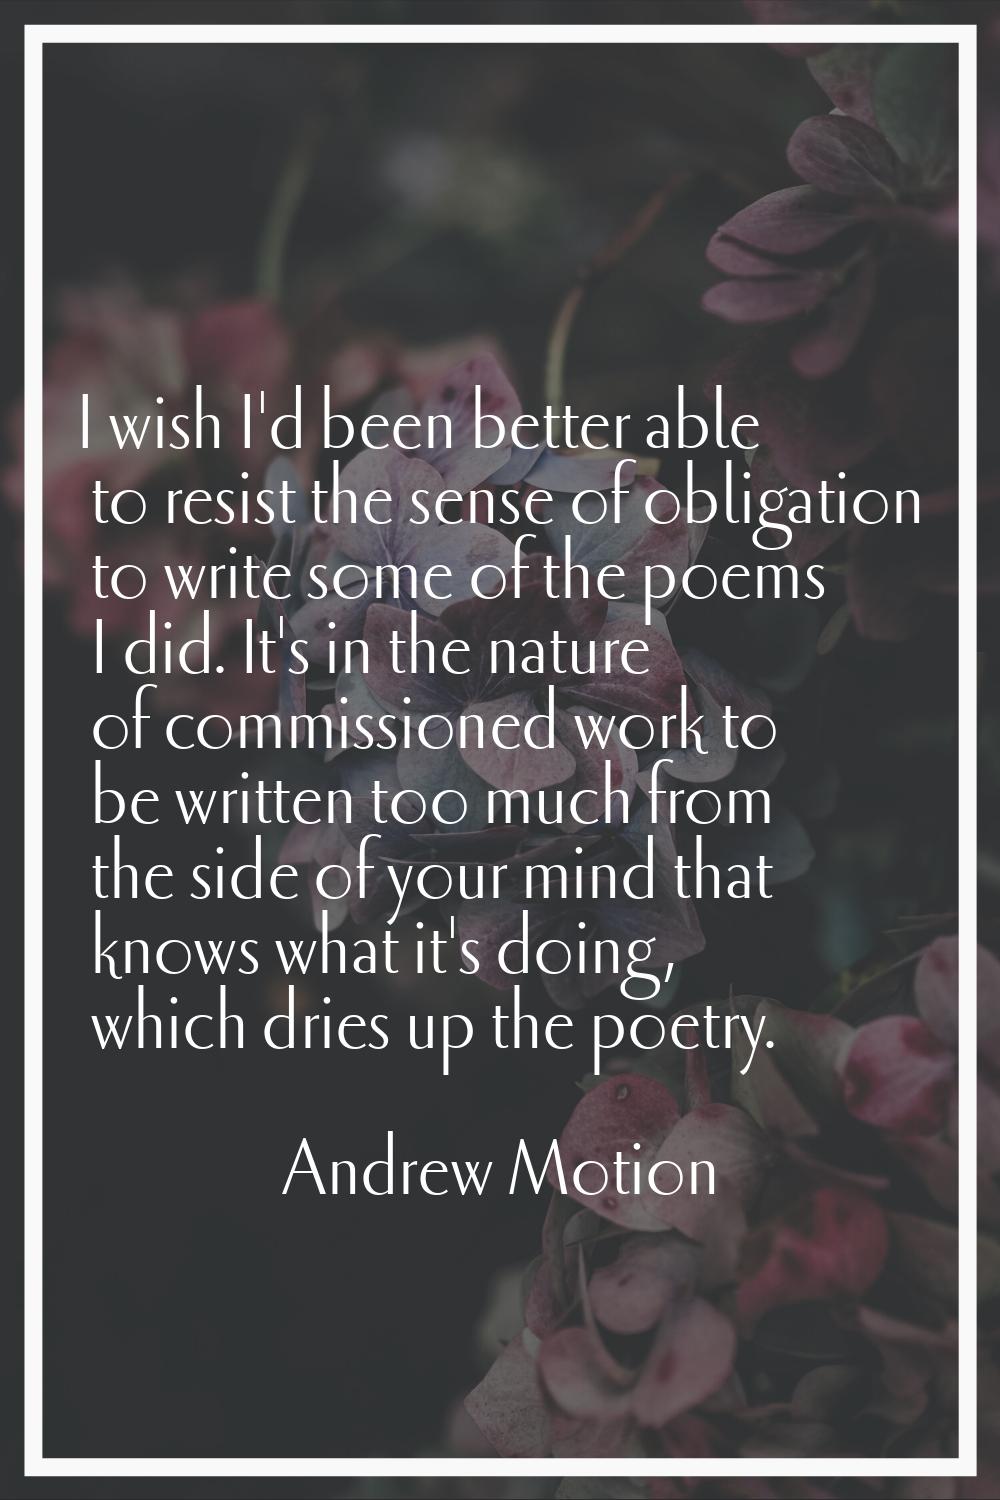 I wish I'd been better able to resist the sense of obligation to write some of the poems I did. It'